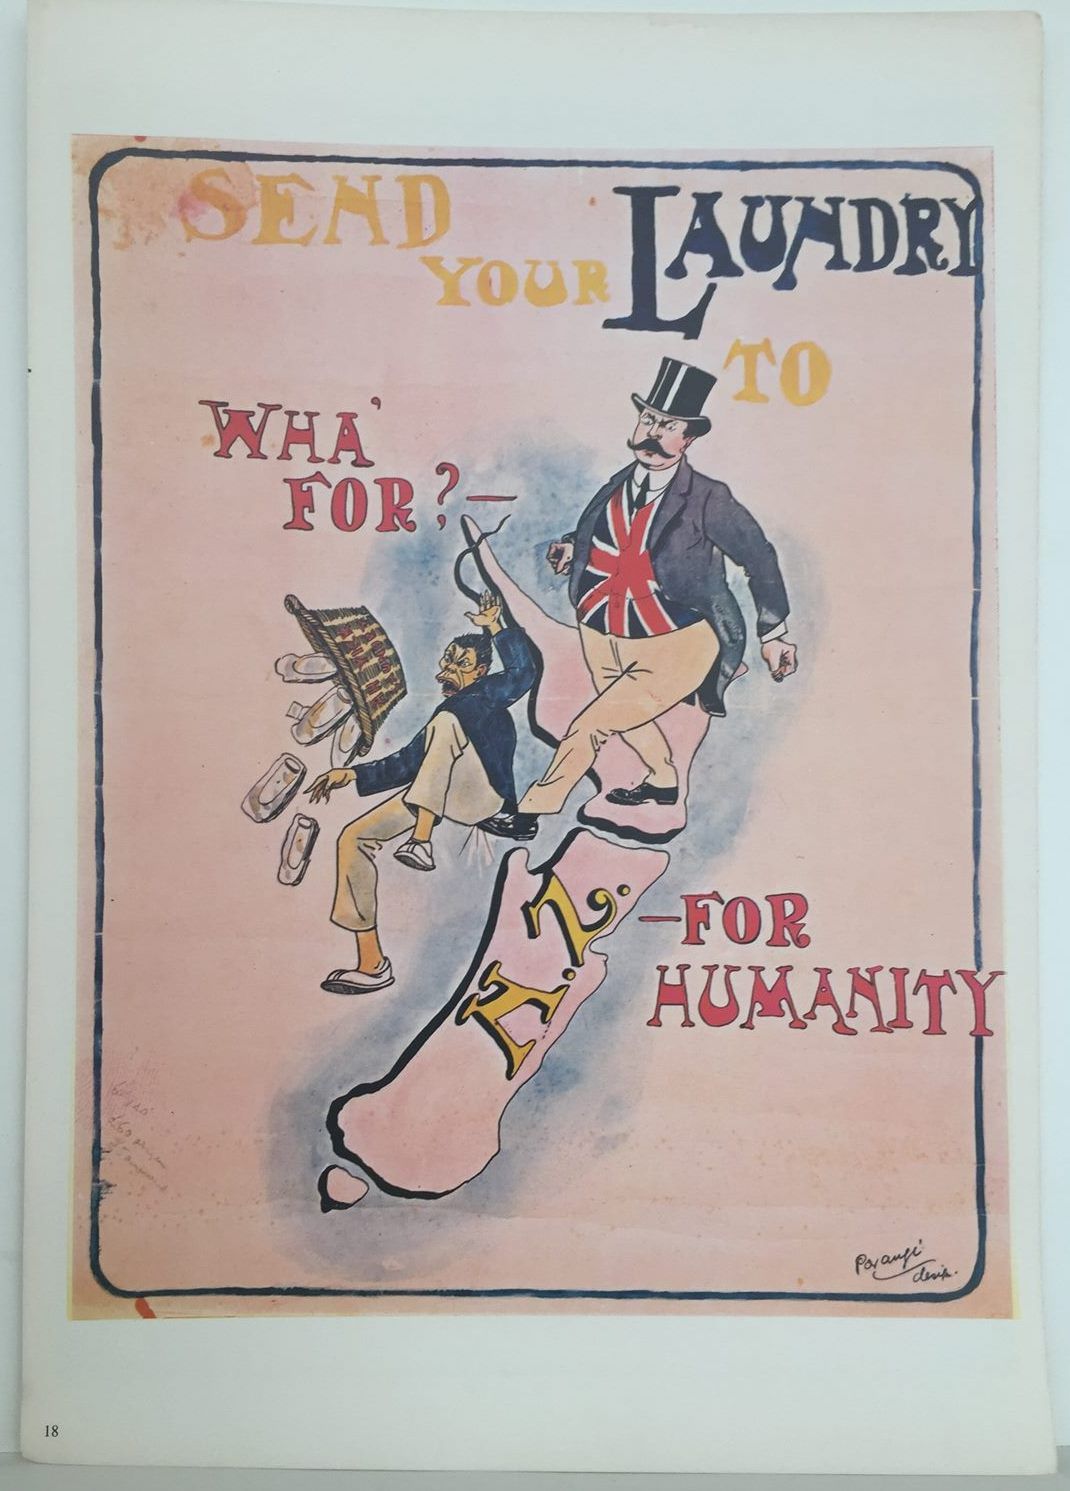 VINTAGE POSTER: Send your Laundry to New Zealand 1907